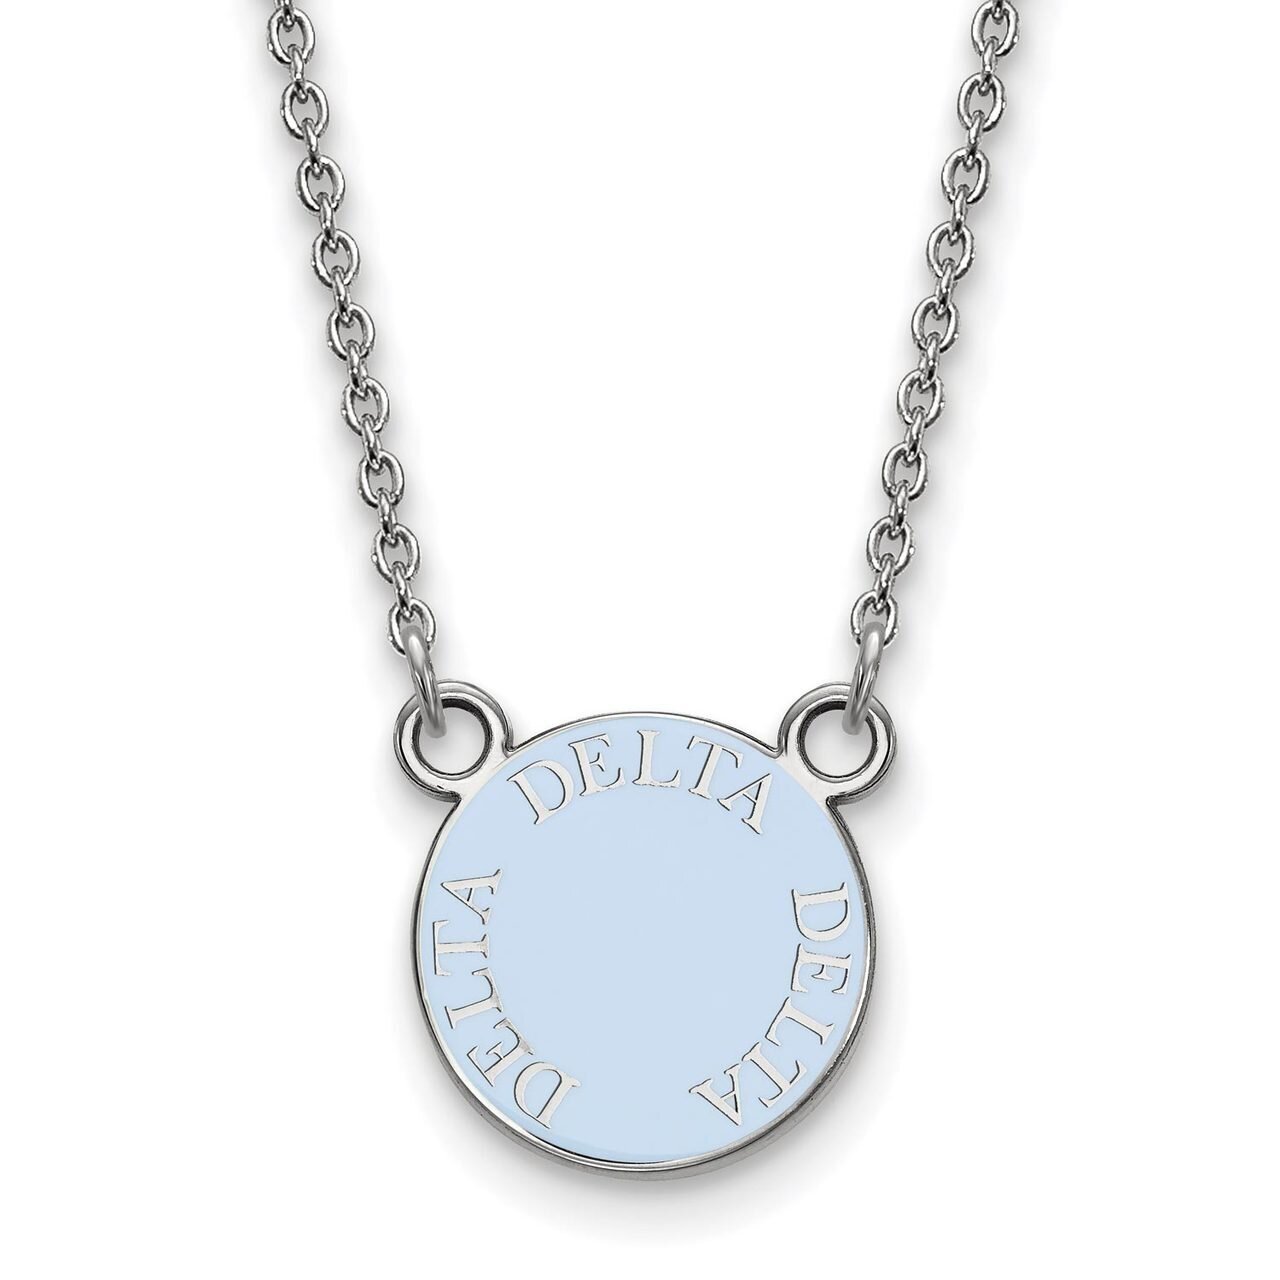 Delta Delta Delta Extra Small Enameled Pendant with 18 Inch Chain Sterling Silver SS012DDD-18